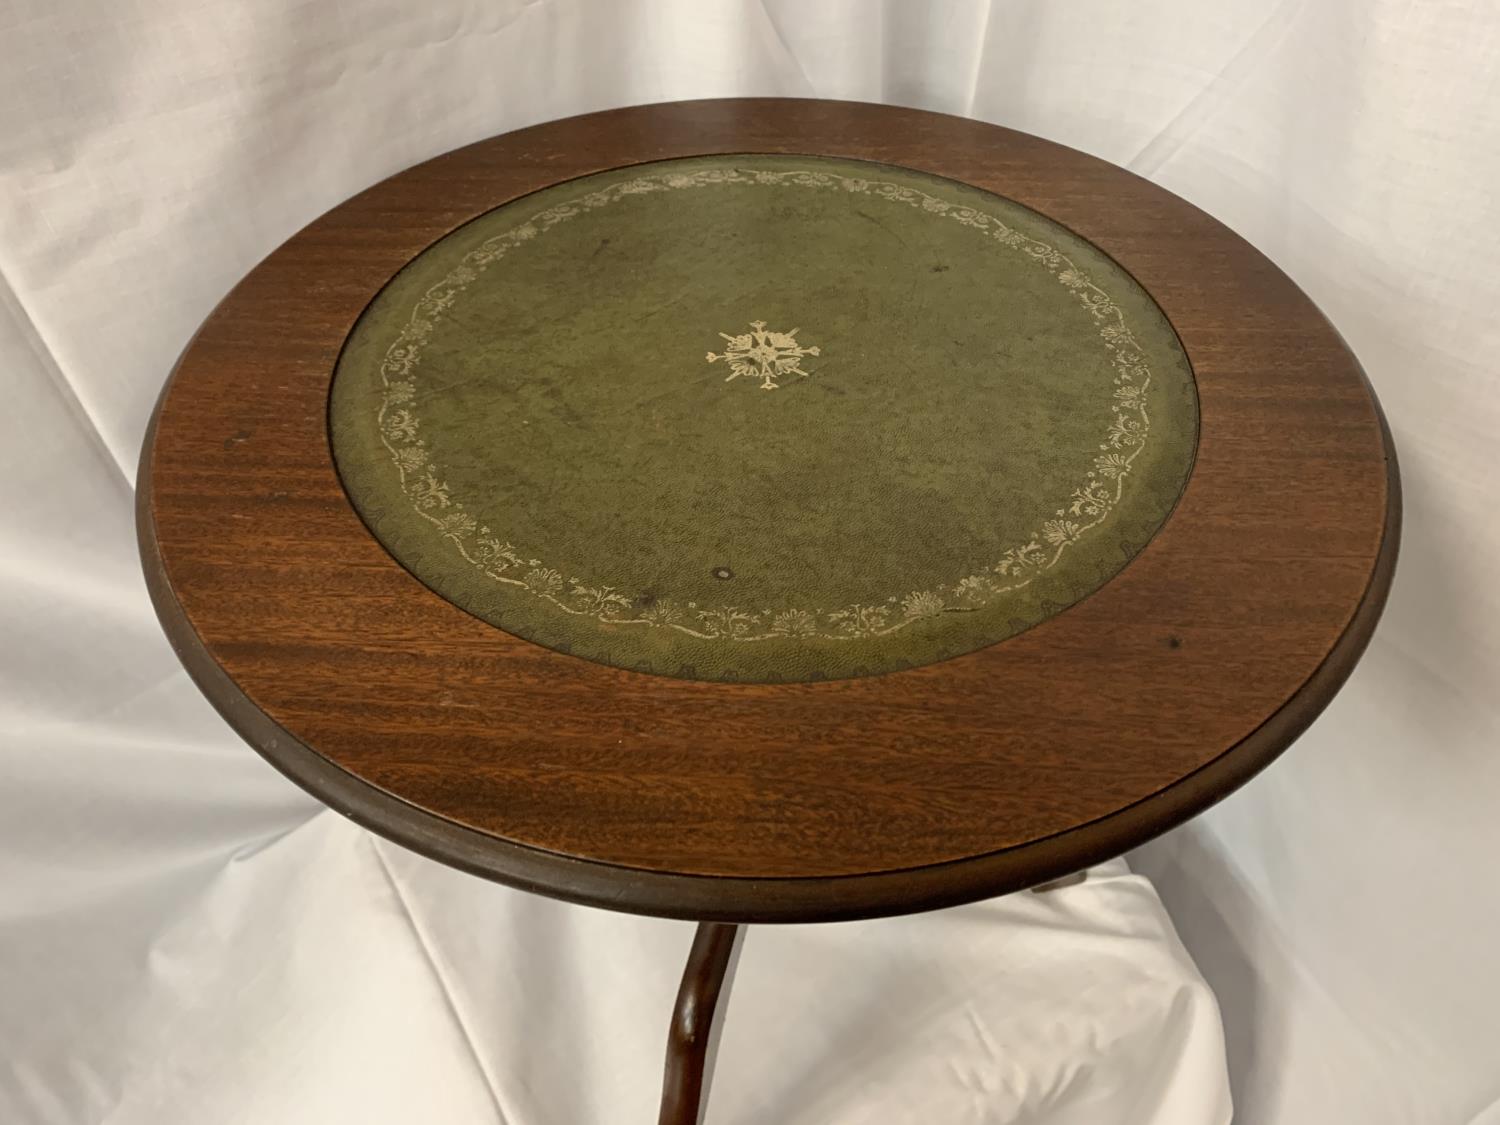 A SMALL CIRCULAR MAHOGANY SIDE TABLE WITH INLAID GREEN LEATHER TOP H:48CM - Image 2 of 3